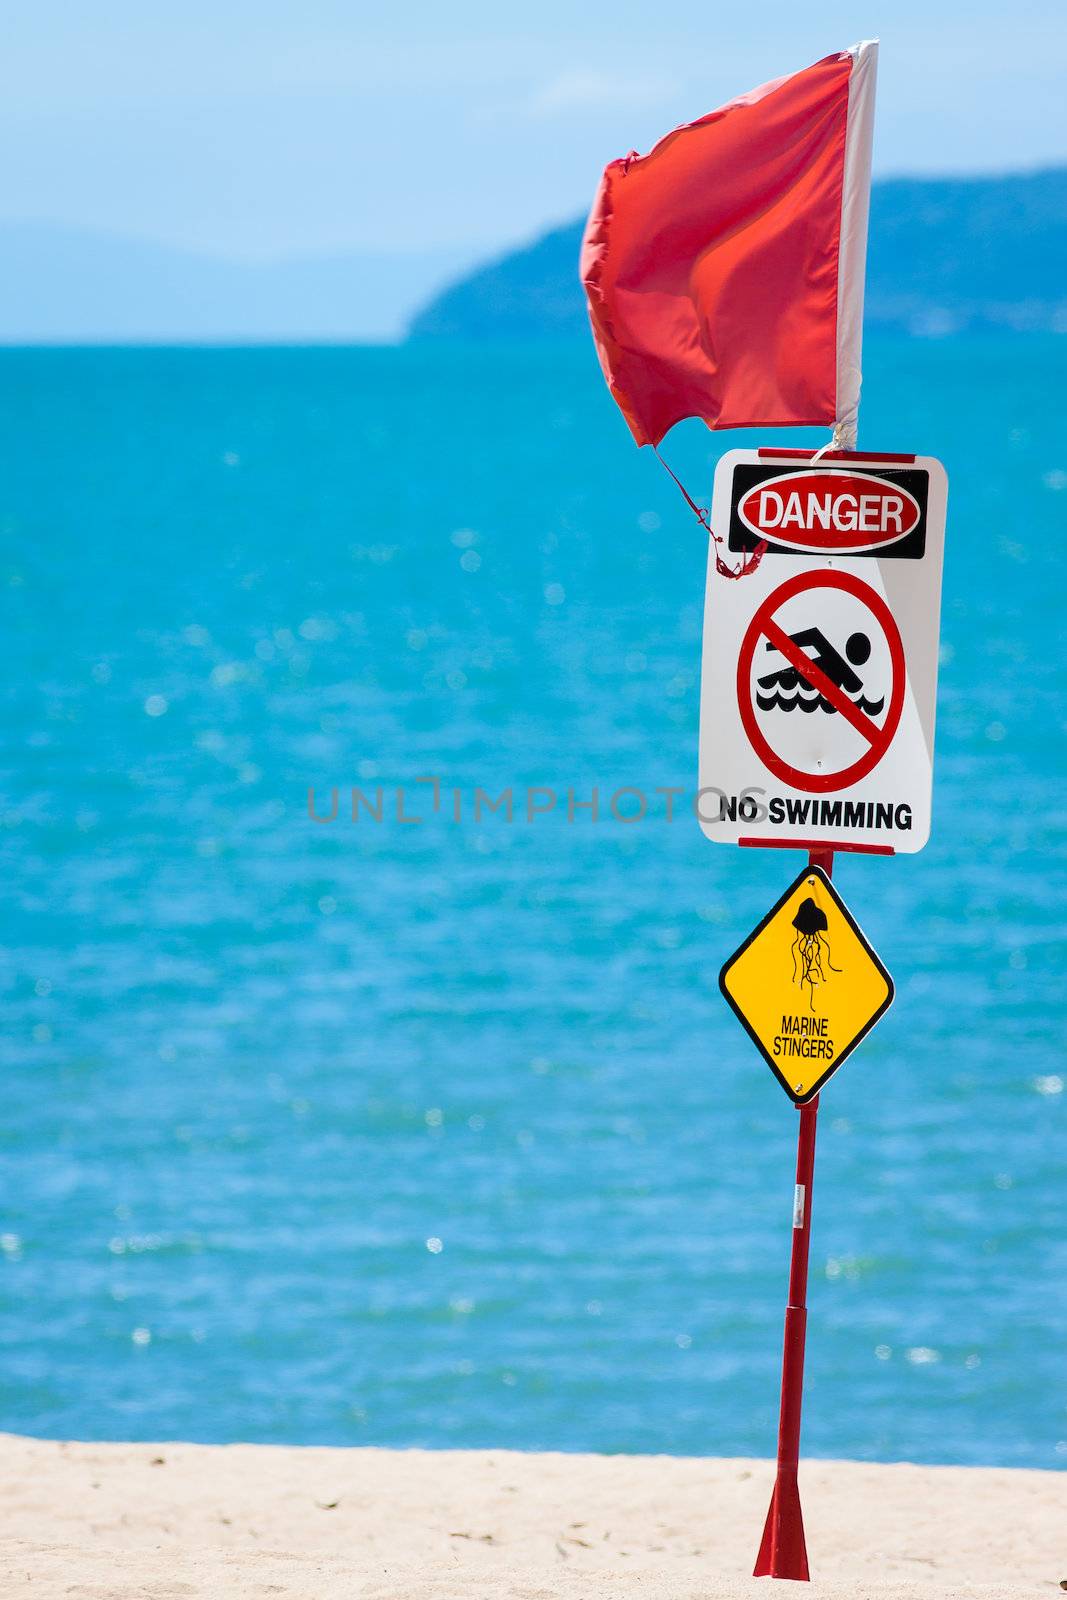 CLose-up of a jellyfish or marine stinger warning sign and red flag at a tropical Australian beach.